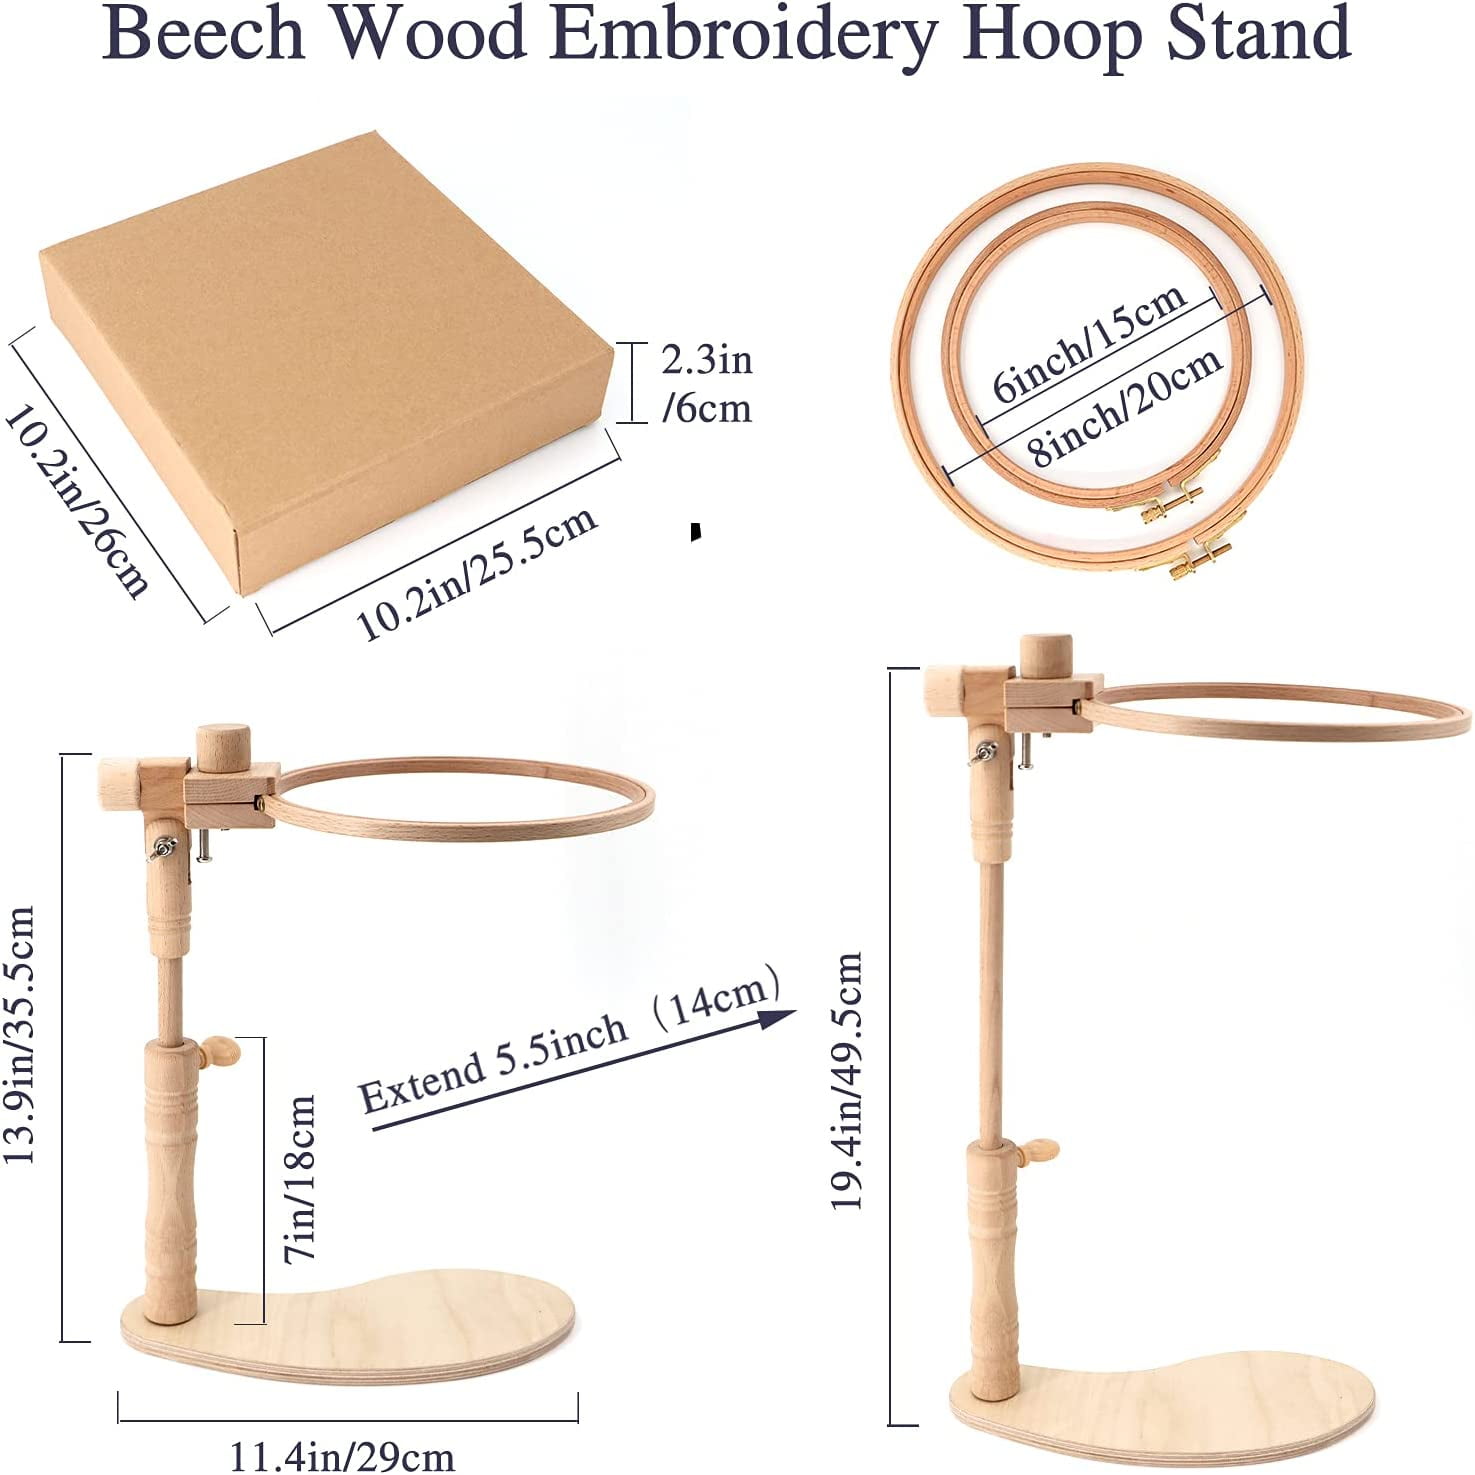 Adjustable Rotated Embroidery Hoop Stand, Cross Stitch Stand Lap, Natural  Beech Wood Embroidery Hoop Holder, Vertical Table Stand Hands Free  Embroider